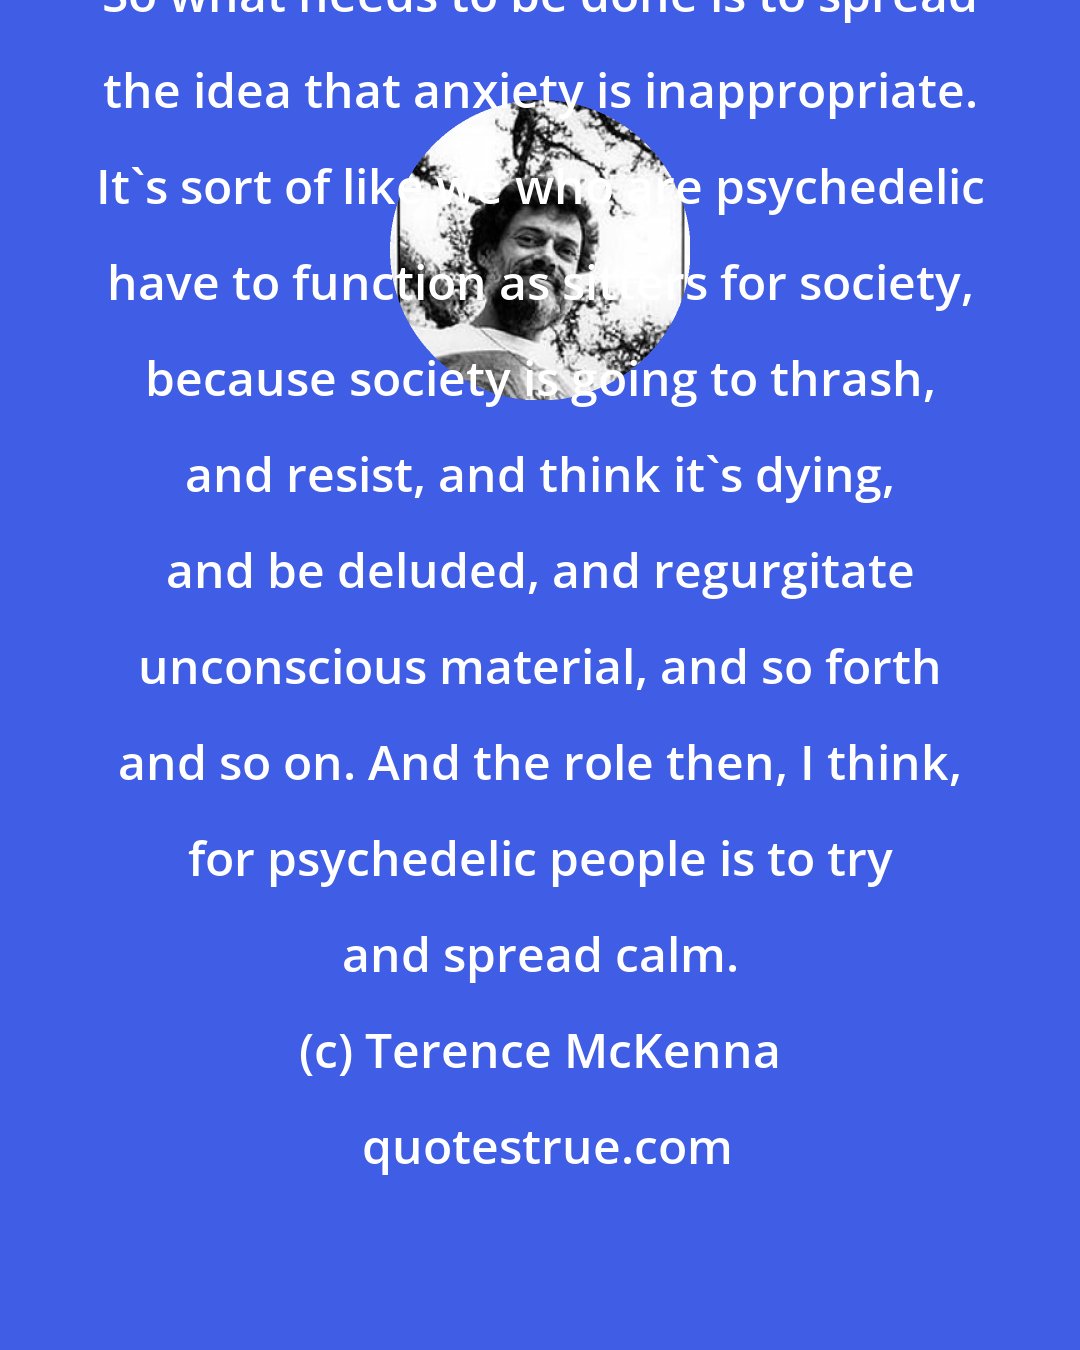 Terence McKenna: So what needs to be done is to spread the idea that anxiety is inappropriate. It's sort of like we who are psychedelic have to function as sitters for society, because society is going to thrash, and resist, and think it's dying, and be deluded, and regurgitate unconscious material, and so forth and so on. And the role then, I think, for psychedelic people is to try and spread calm.